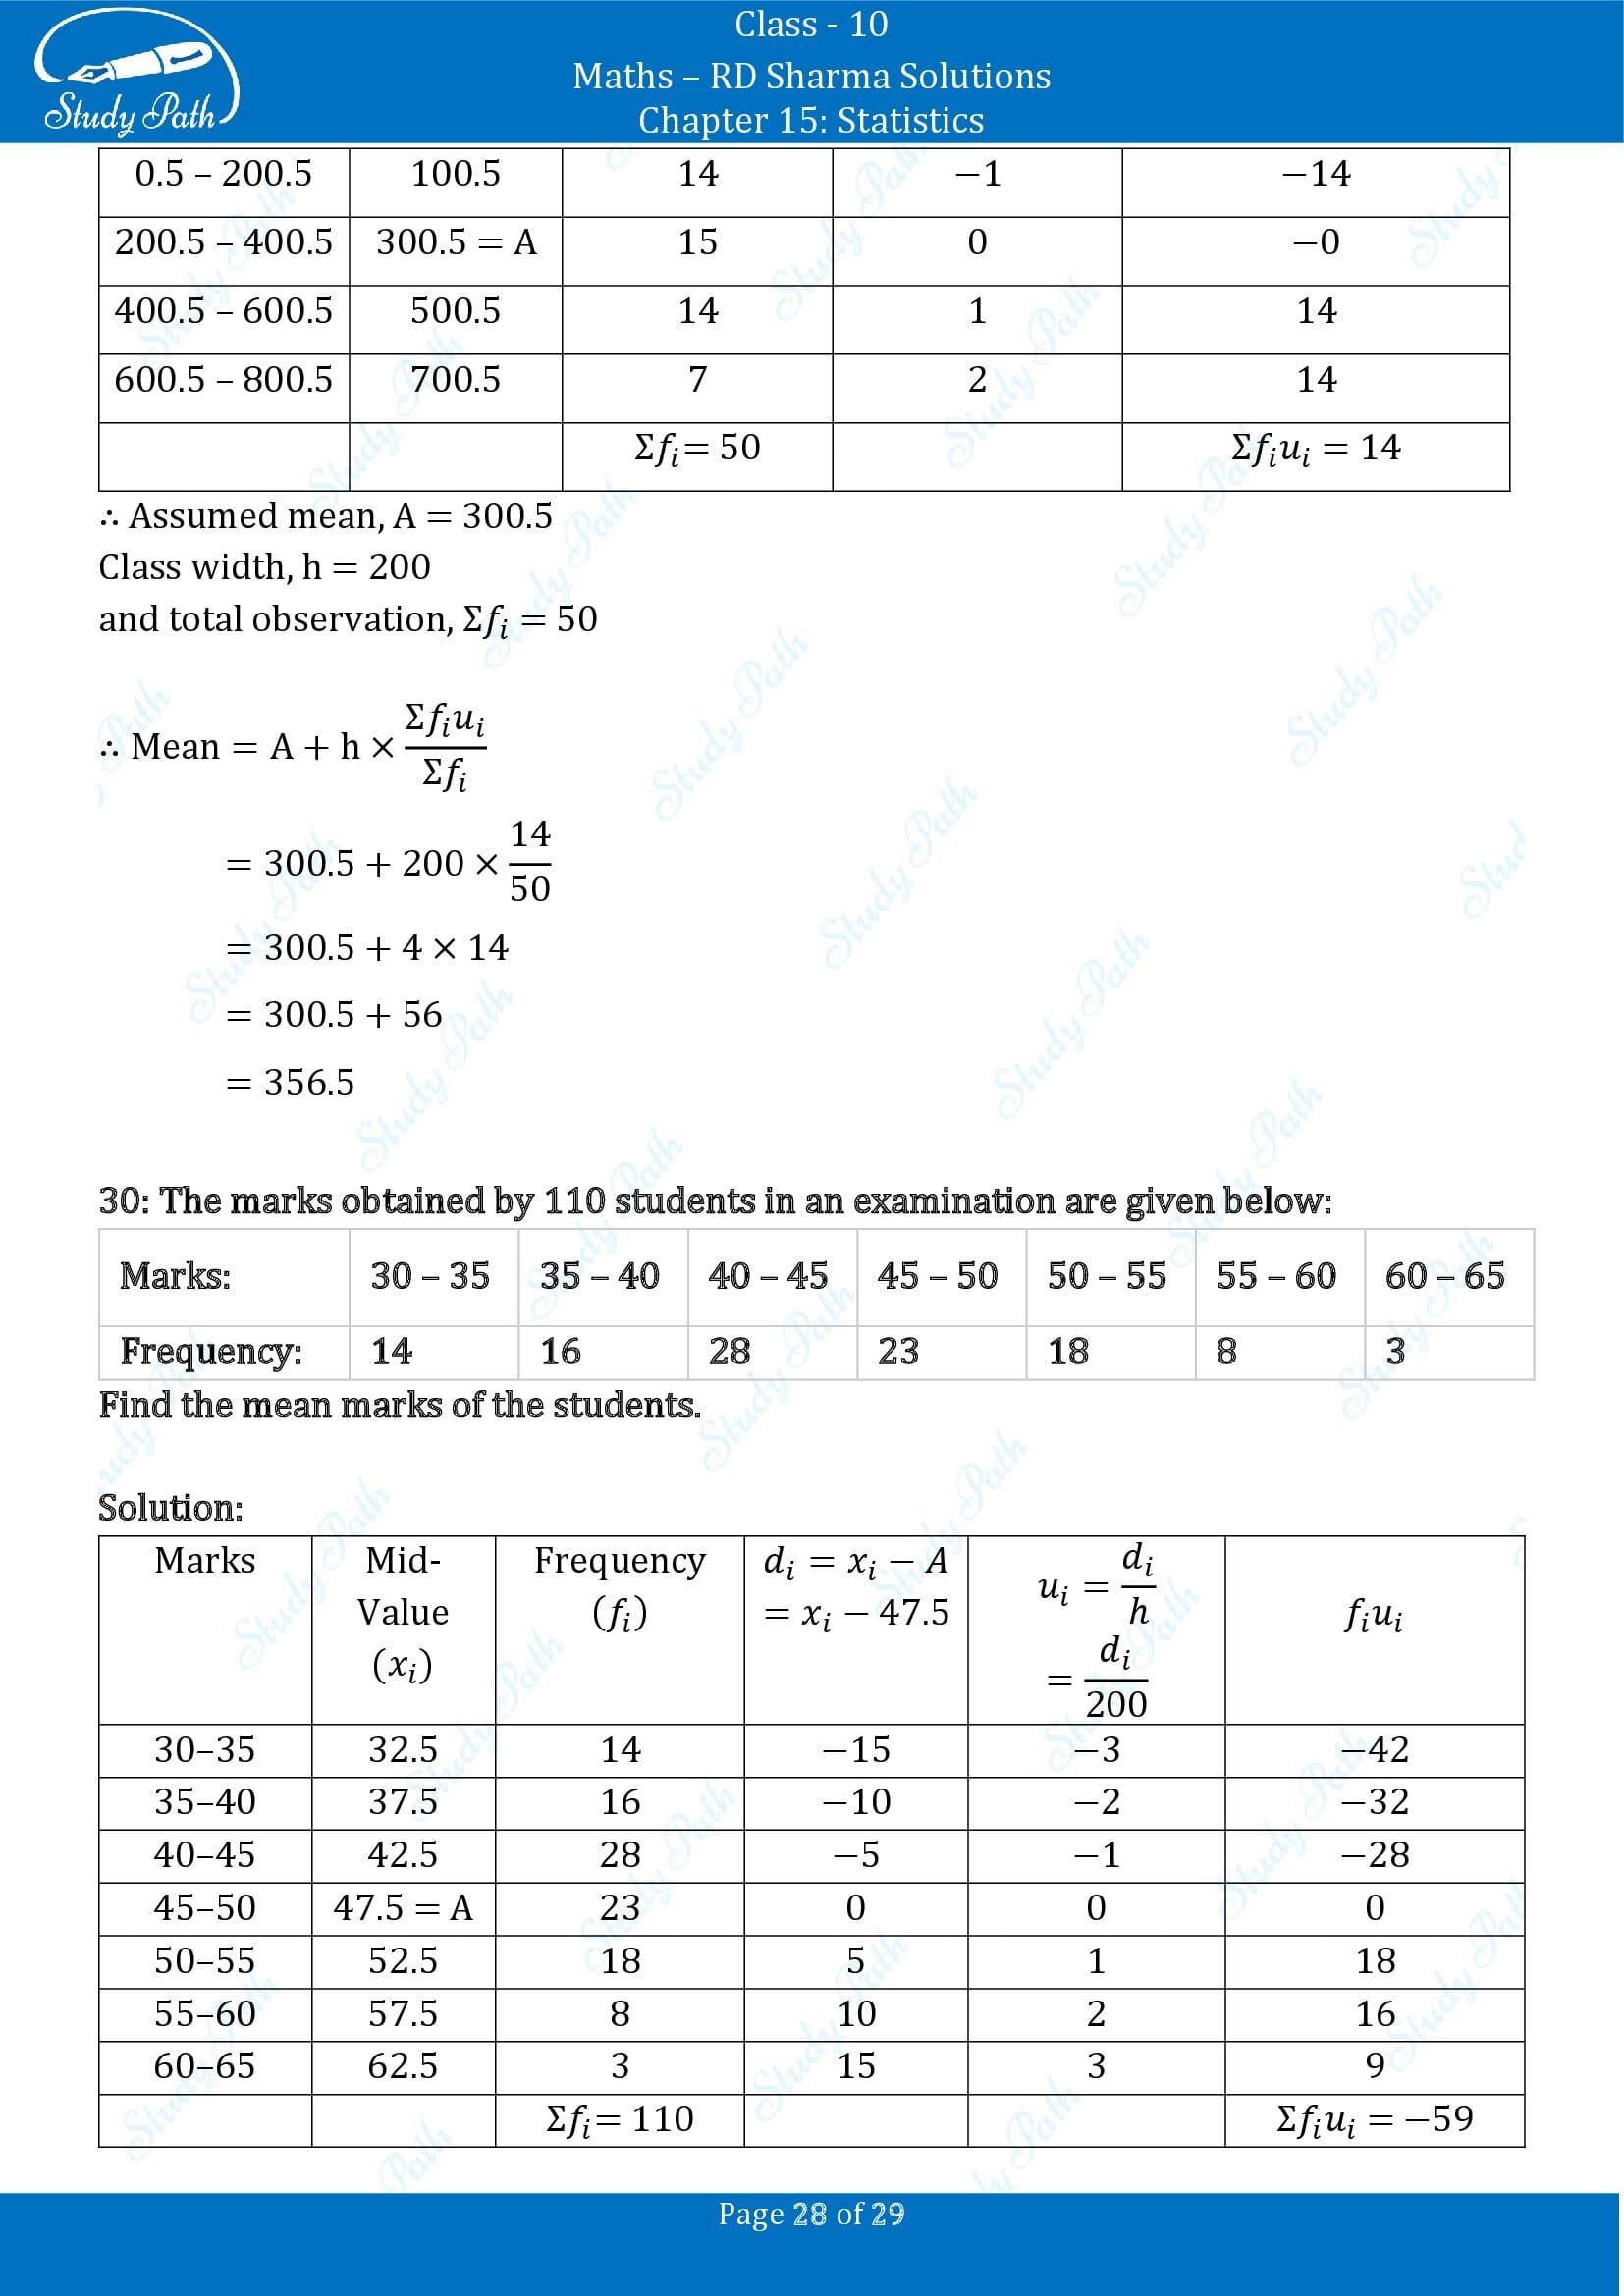 RD Sharma Solutions Class 10 Chapter 15 Statistics Exercise 15.3 0028